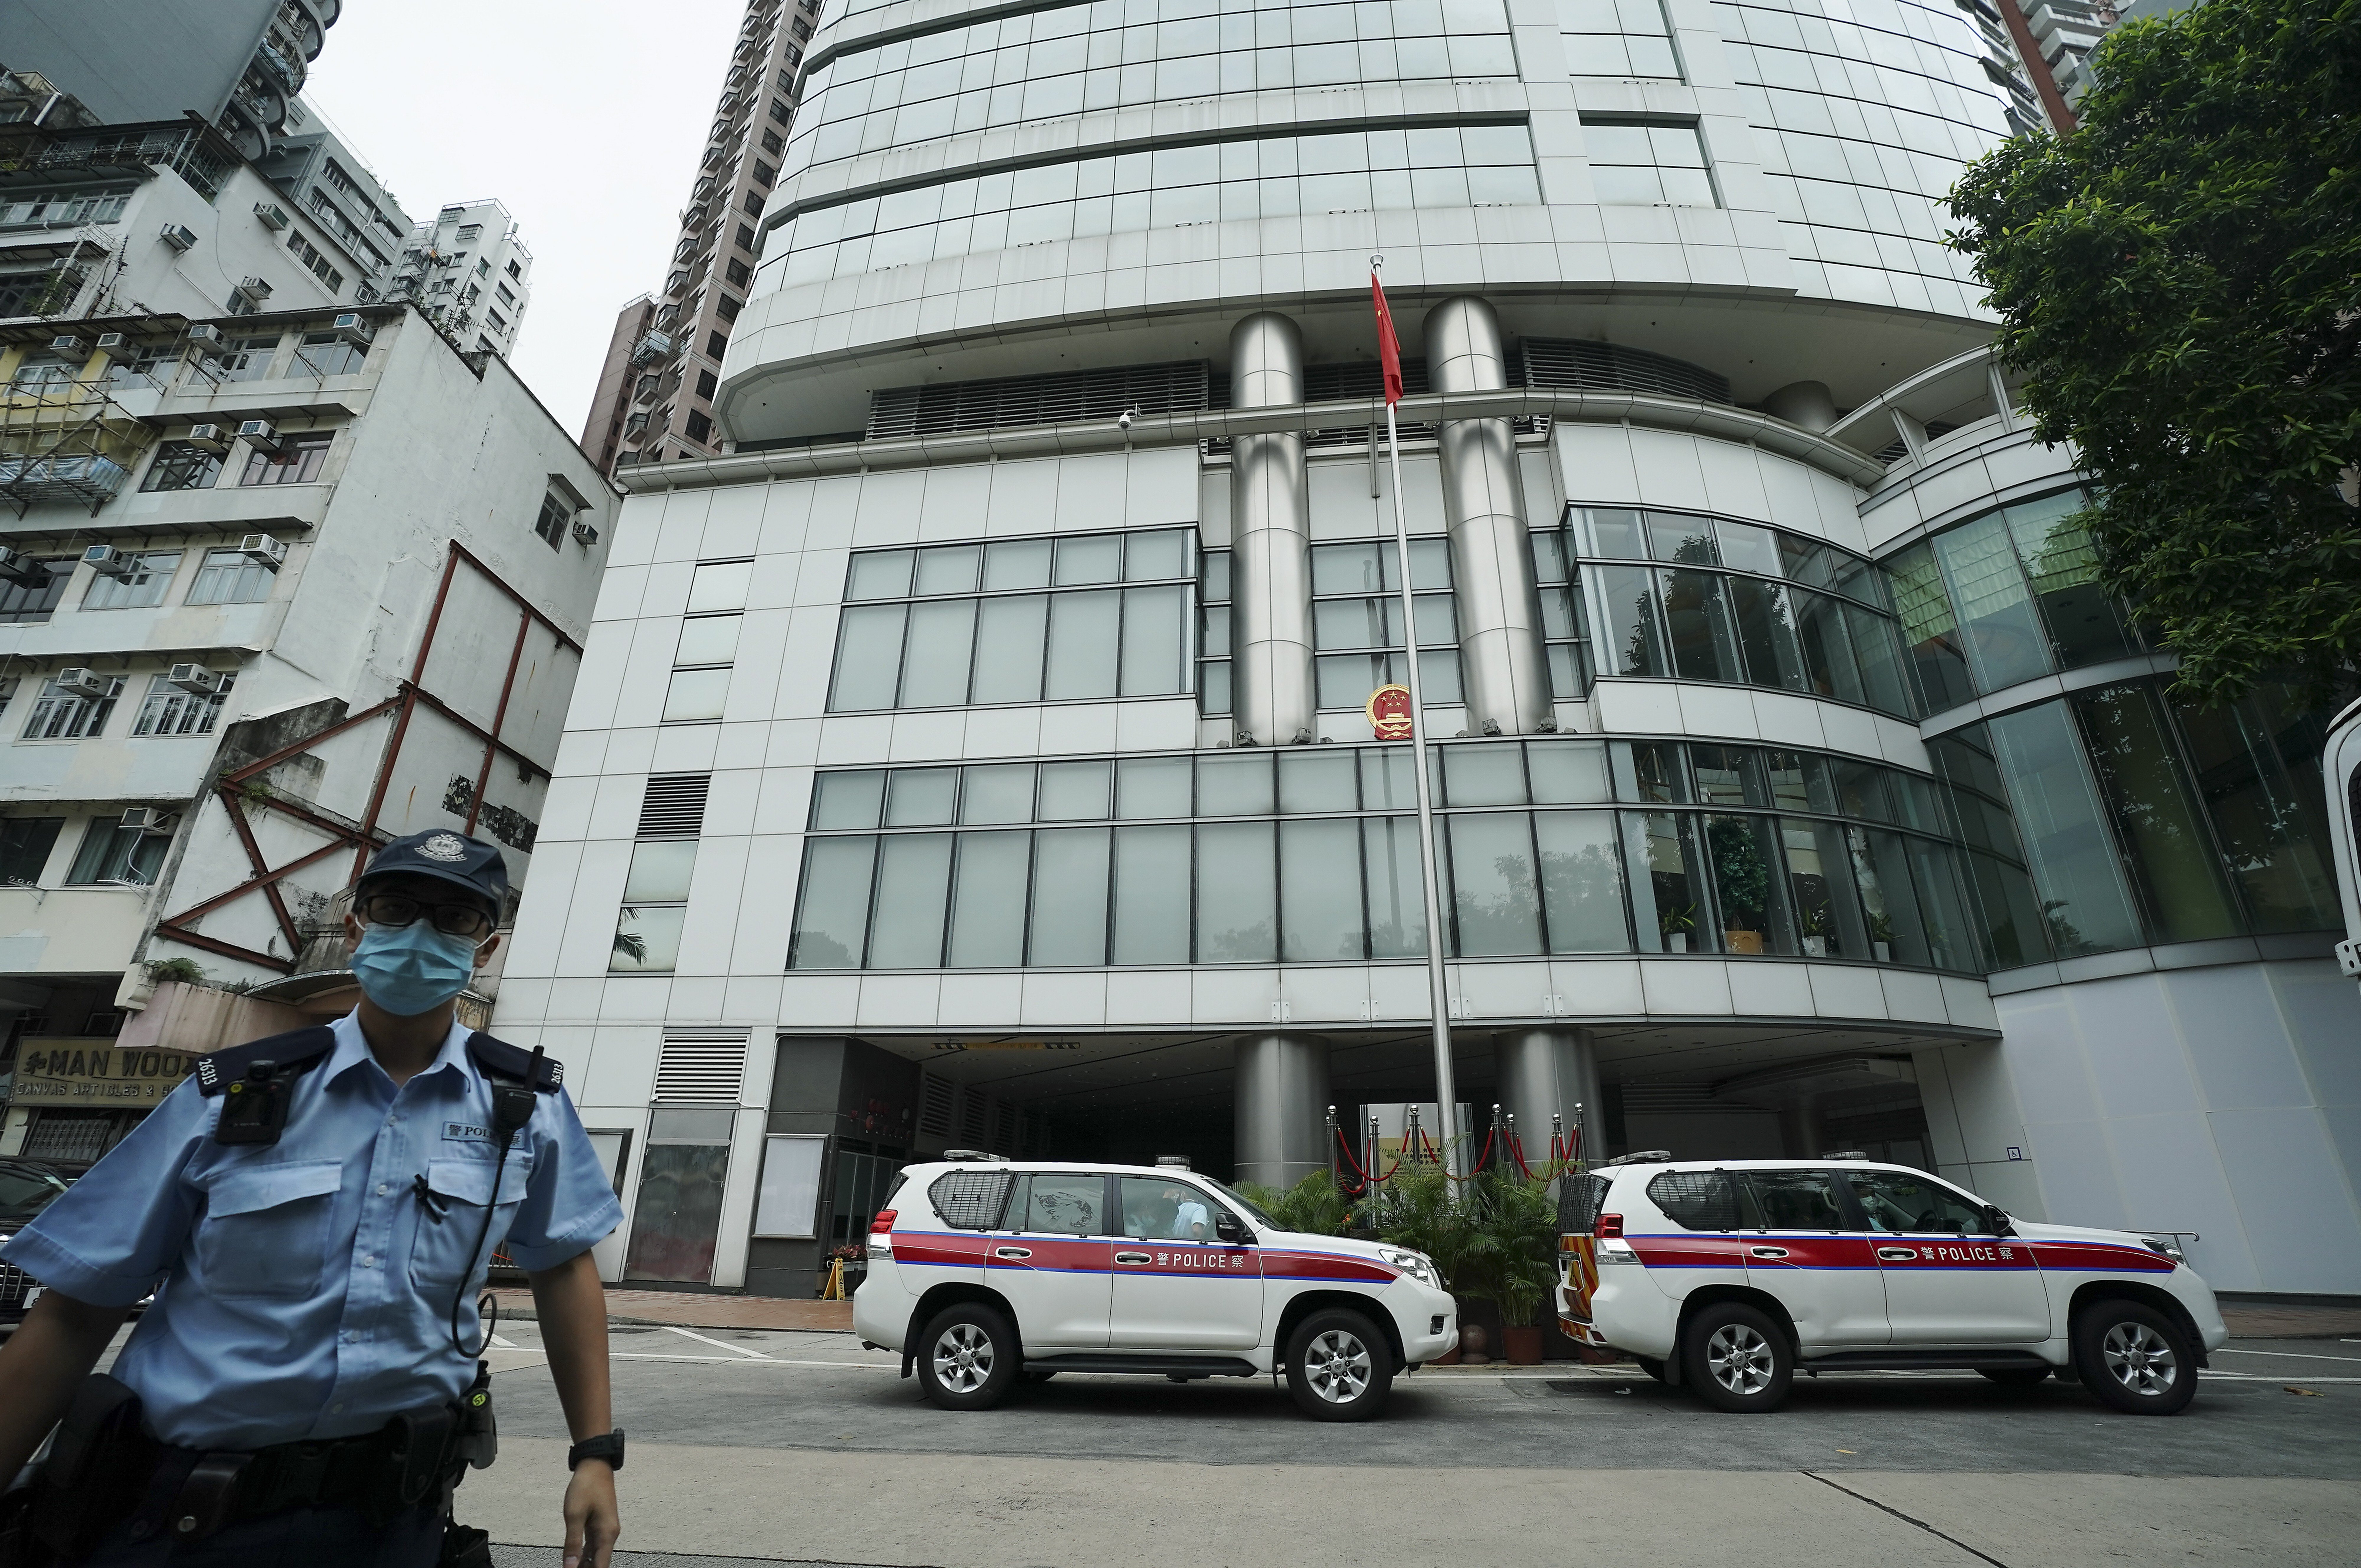 Under the national security law, the 5 people arrested could face a maximum penalty of life imprisonment if charged and convicted. Photo: SCMP / Felix Wong